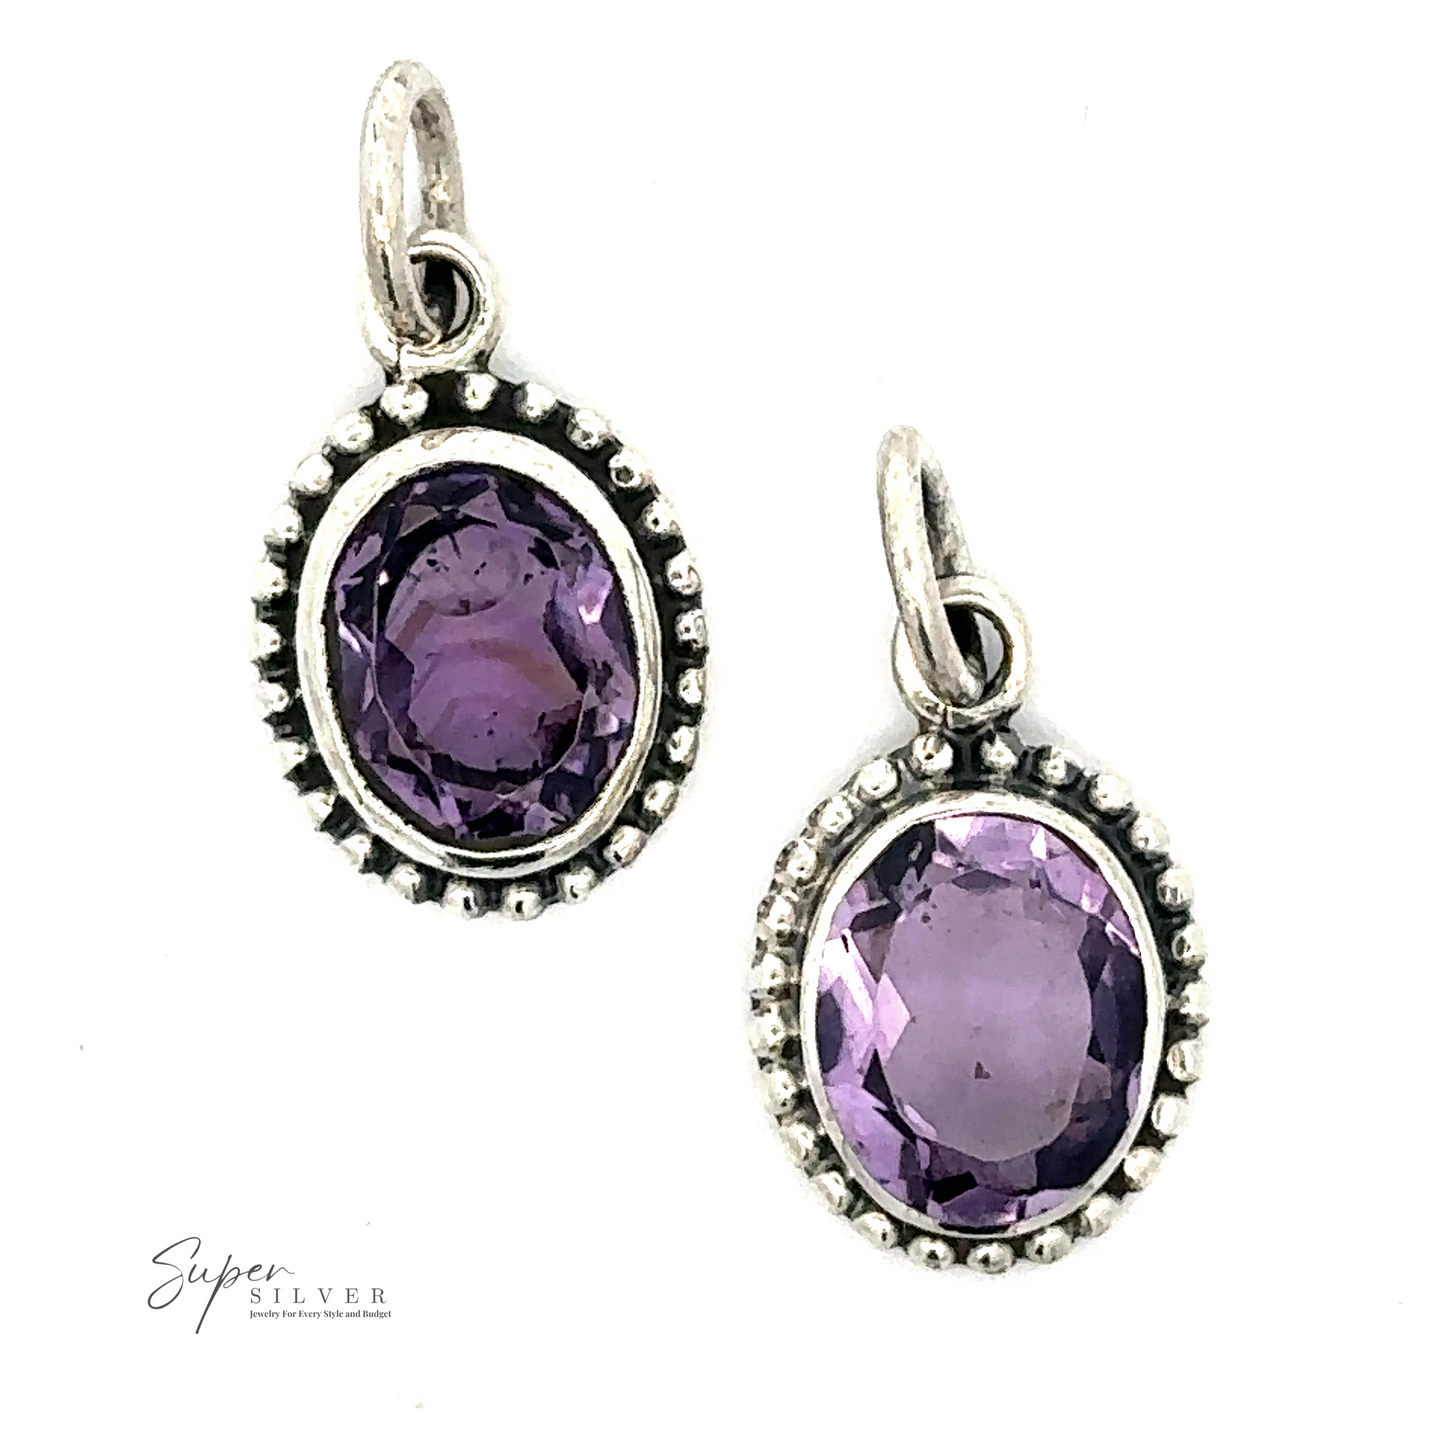 Two Oval Faceted Amethyst Pendants set in sterling silver with decorative bead detailing around the edges. As a calming accessory, the soft purple hues provide tranquility. The brand name "Super Silver" is visible in the lower left corner.